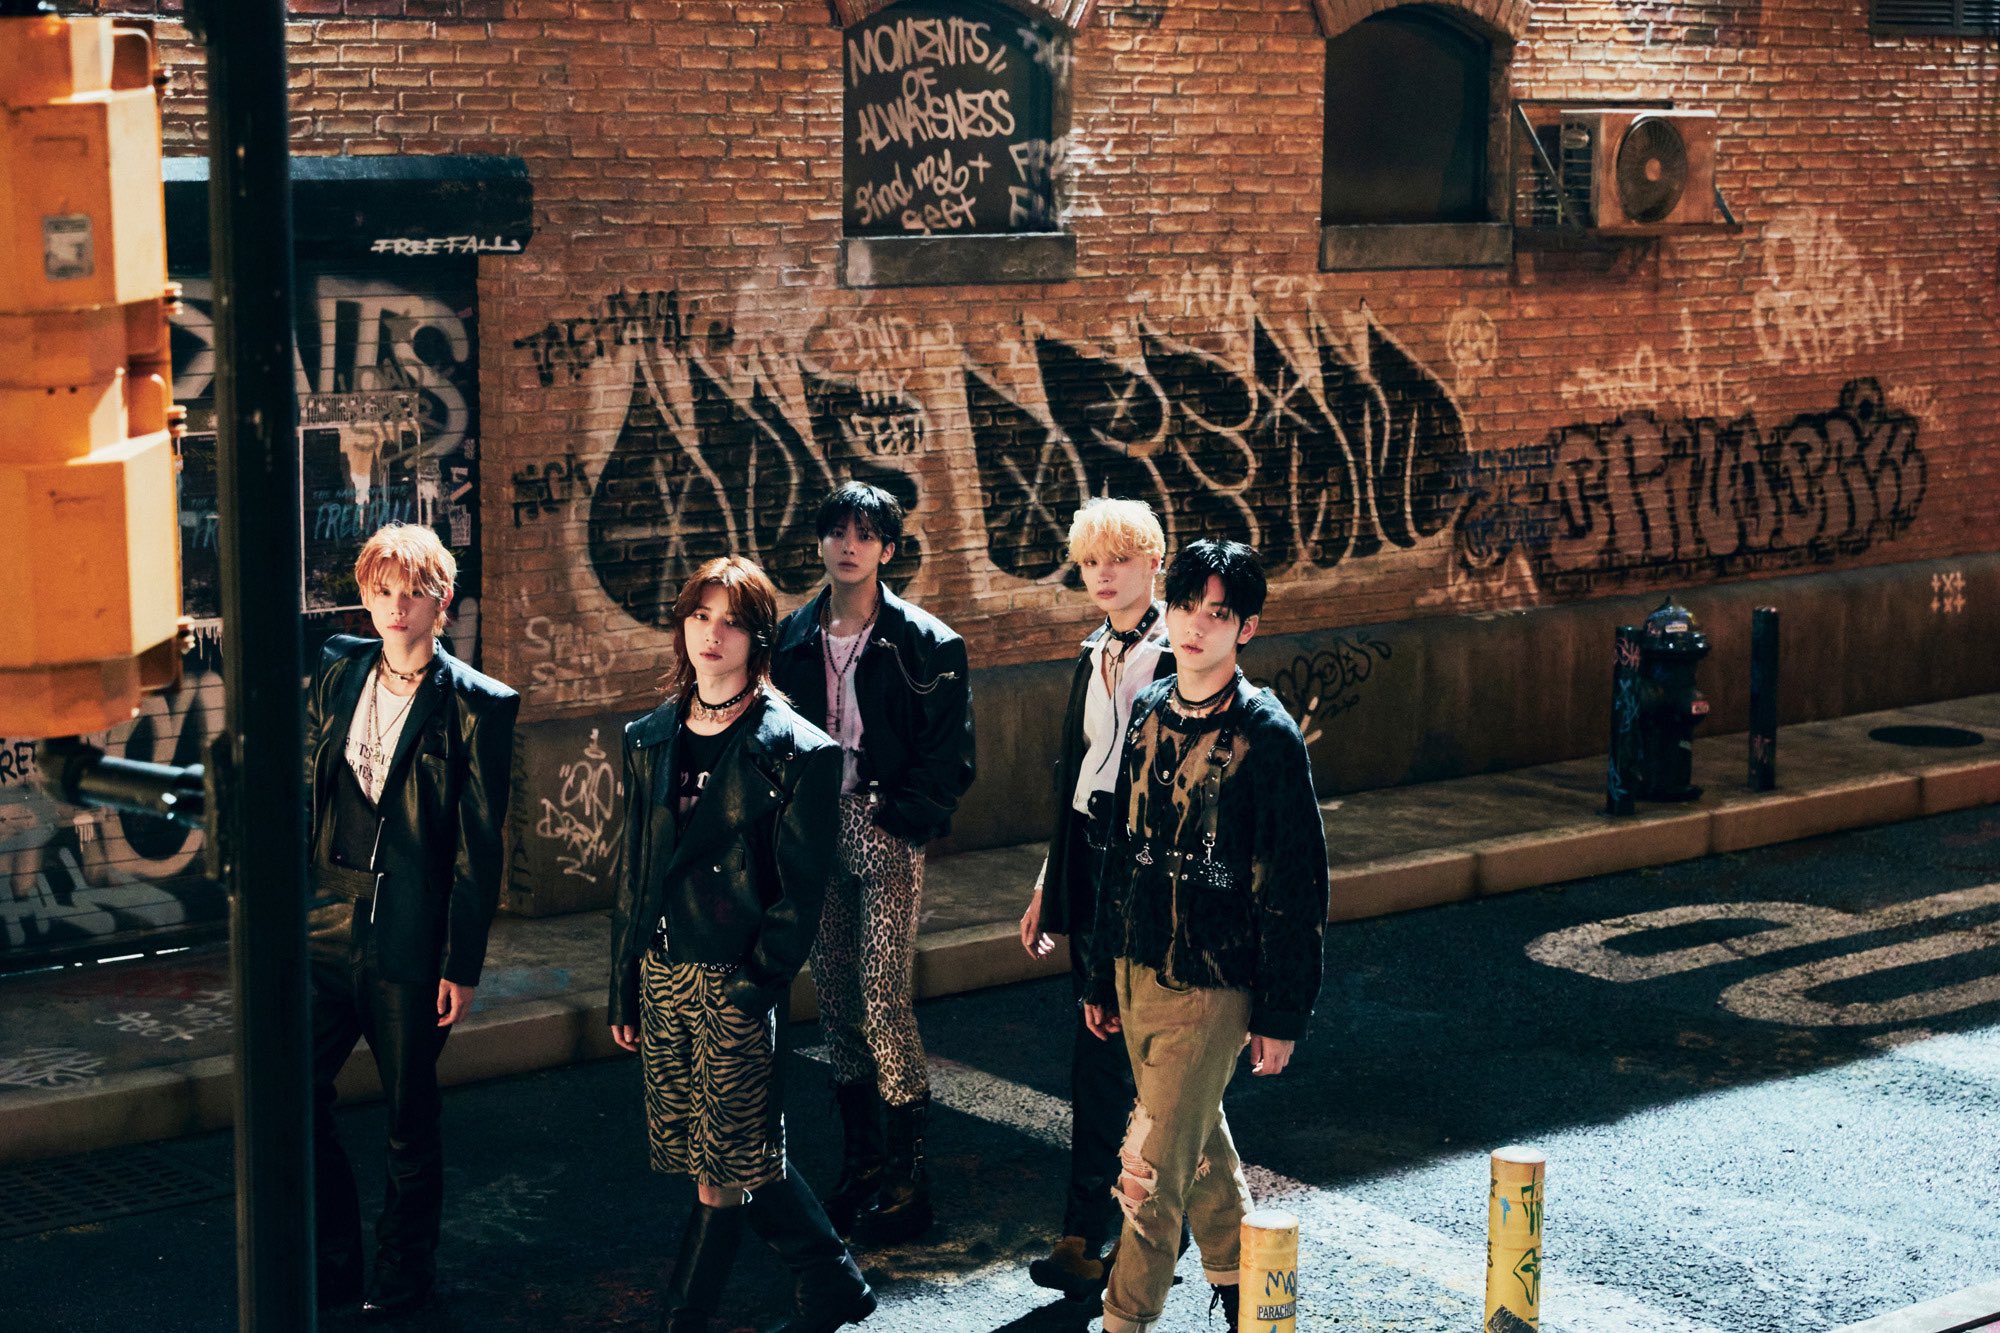 A picture of all five members of the Kpop group TXT (Tomorrow By Together) walking down a graffiti'd alleyway.